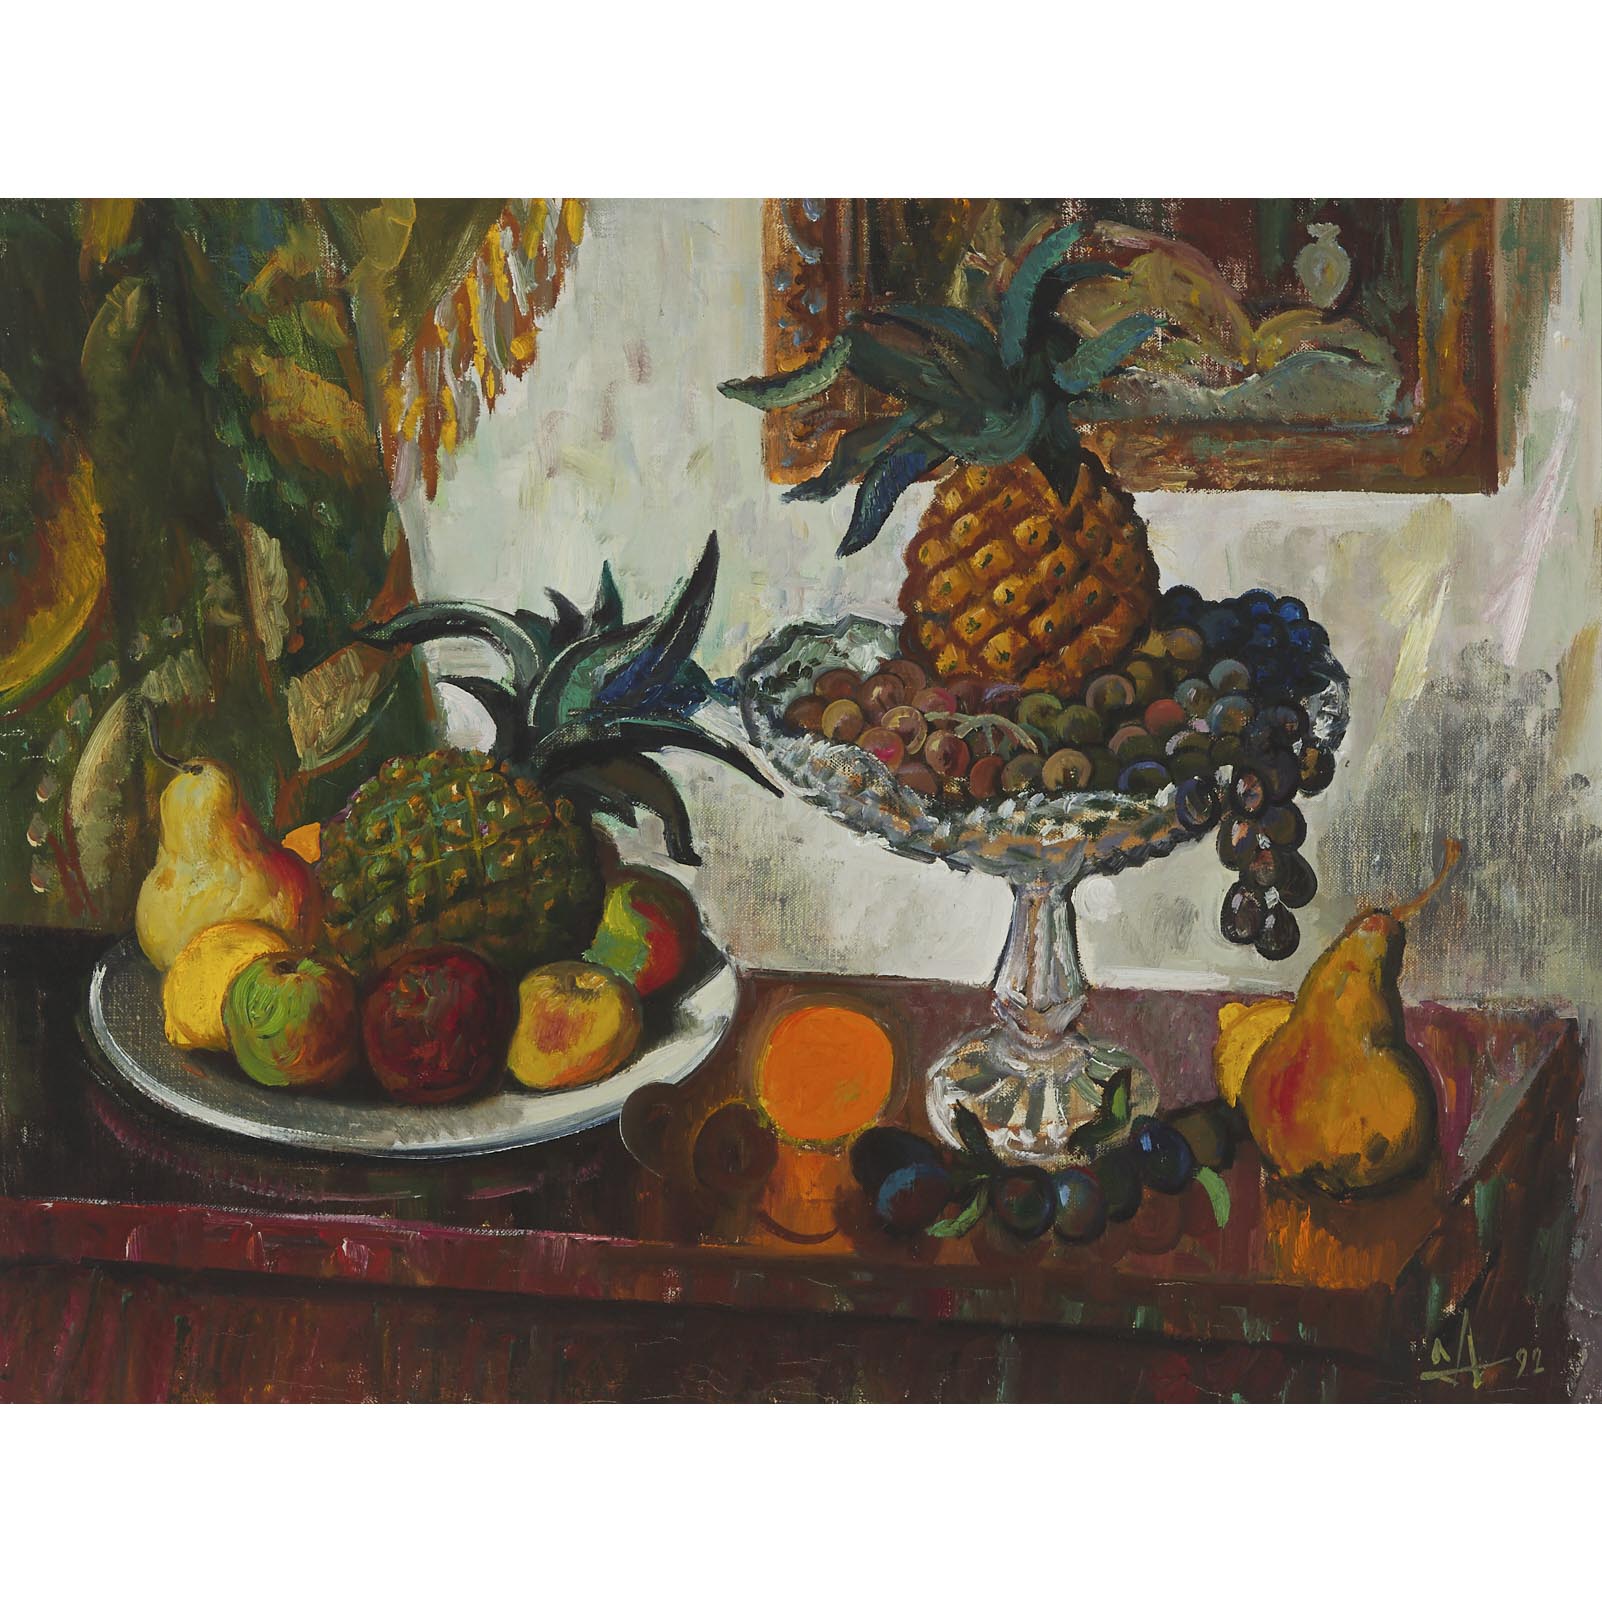 Leonty Alekseevich Arapov (1937-2001), PINEAPPLES AND ORANGES, 1992, Oil on canvas; signed with init